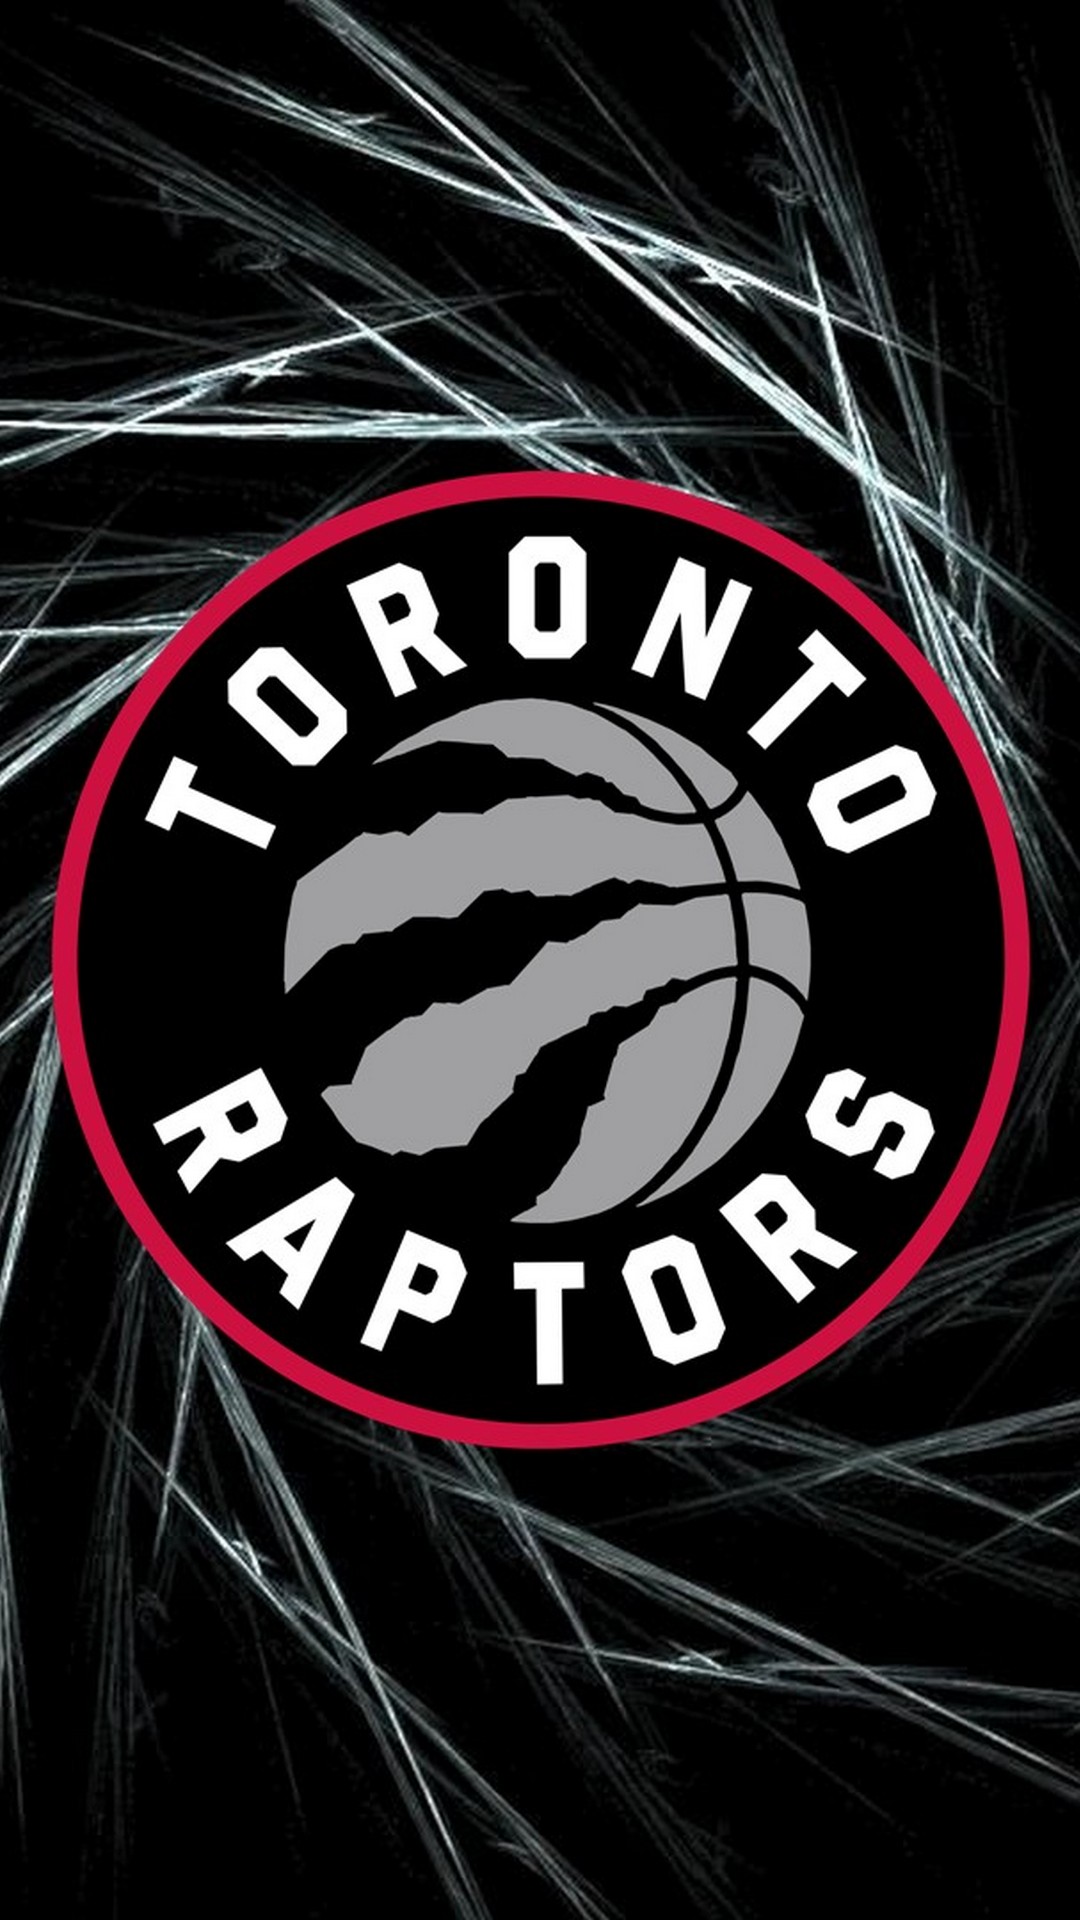 Android Wallpaper HD Toronto Raptors with image resolution 1080x1920 pixel. You can make this wallpaper for your Android backgrounds, Tablet, Smartphones Screensavers and Mobile Phone Lock Screen